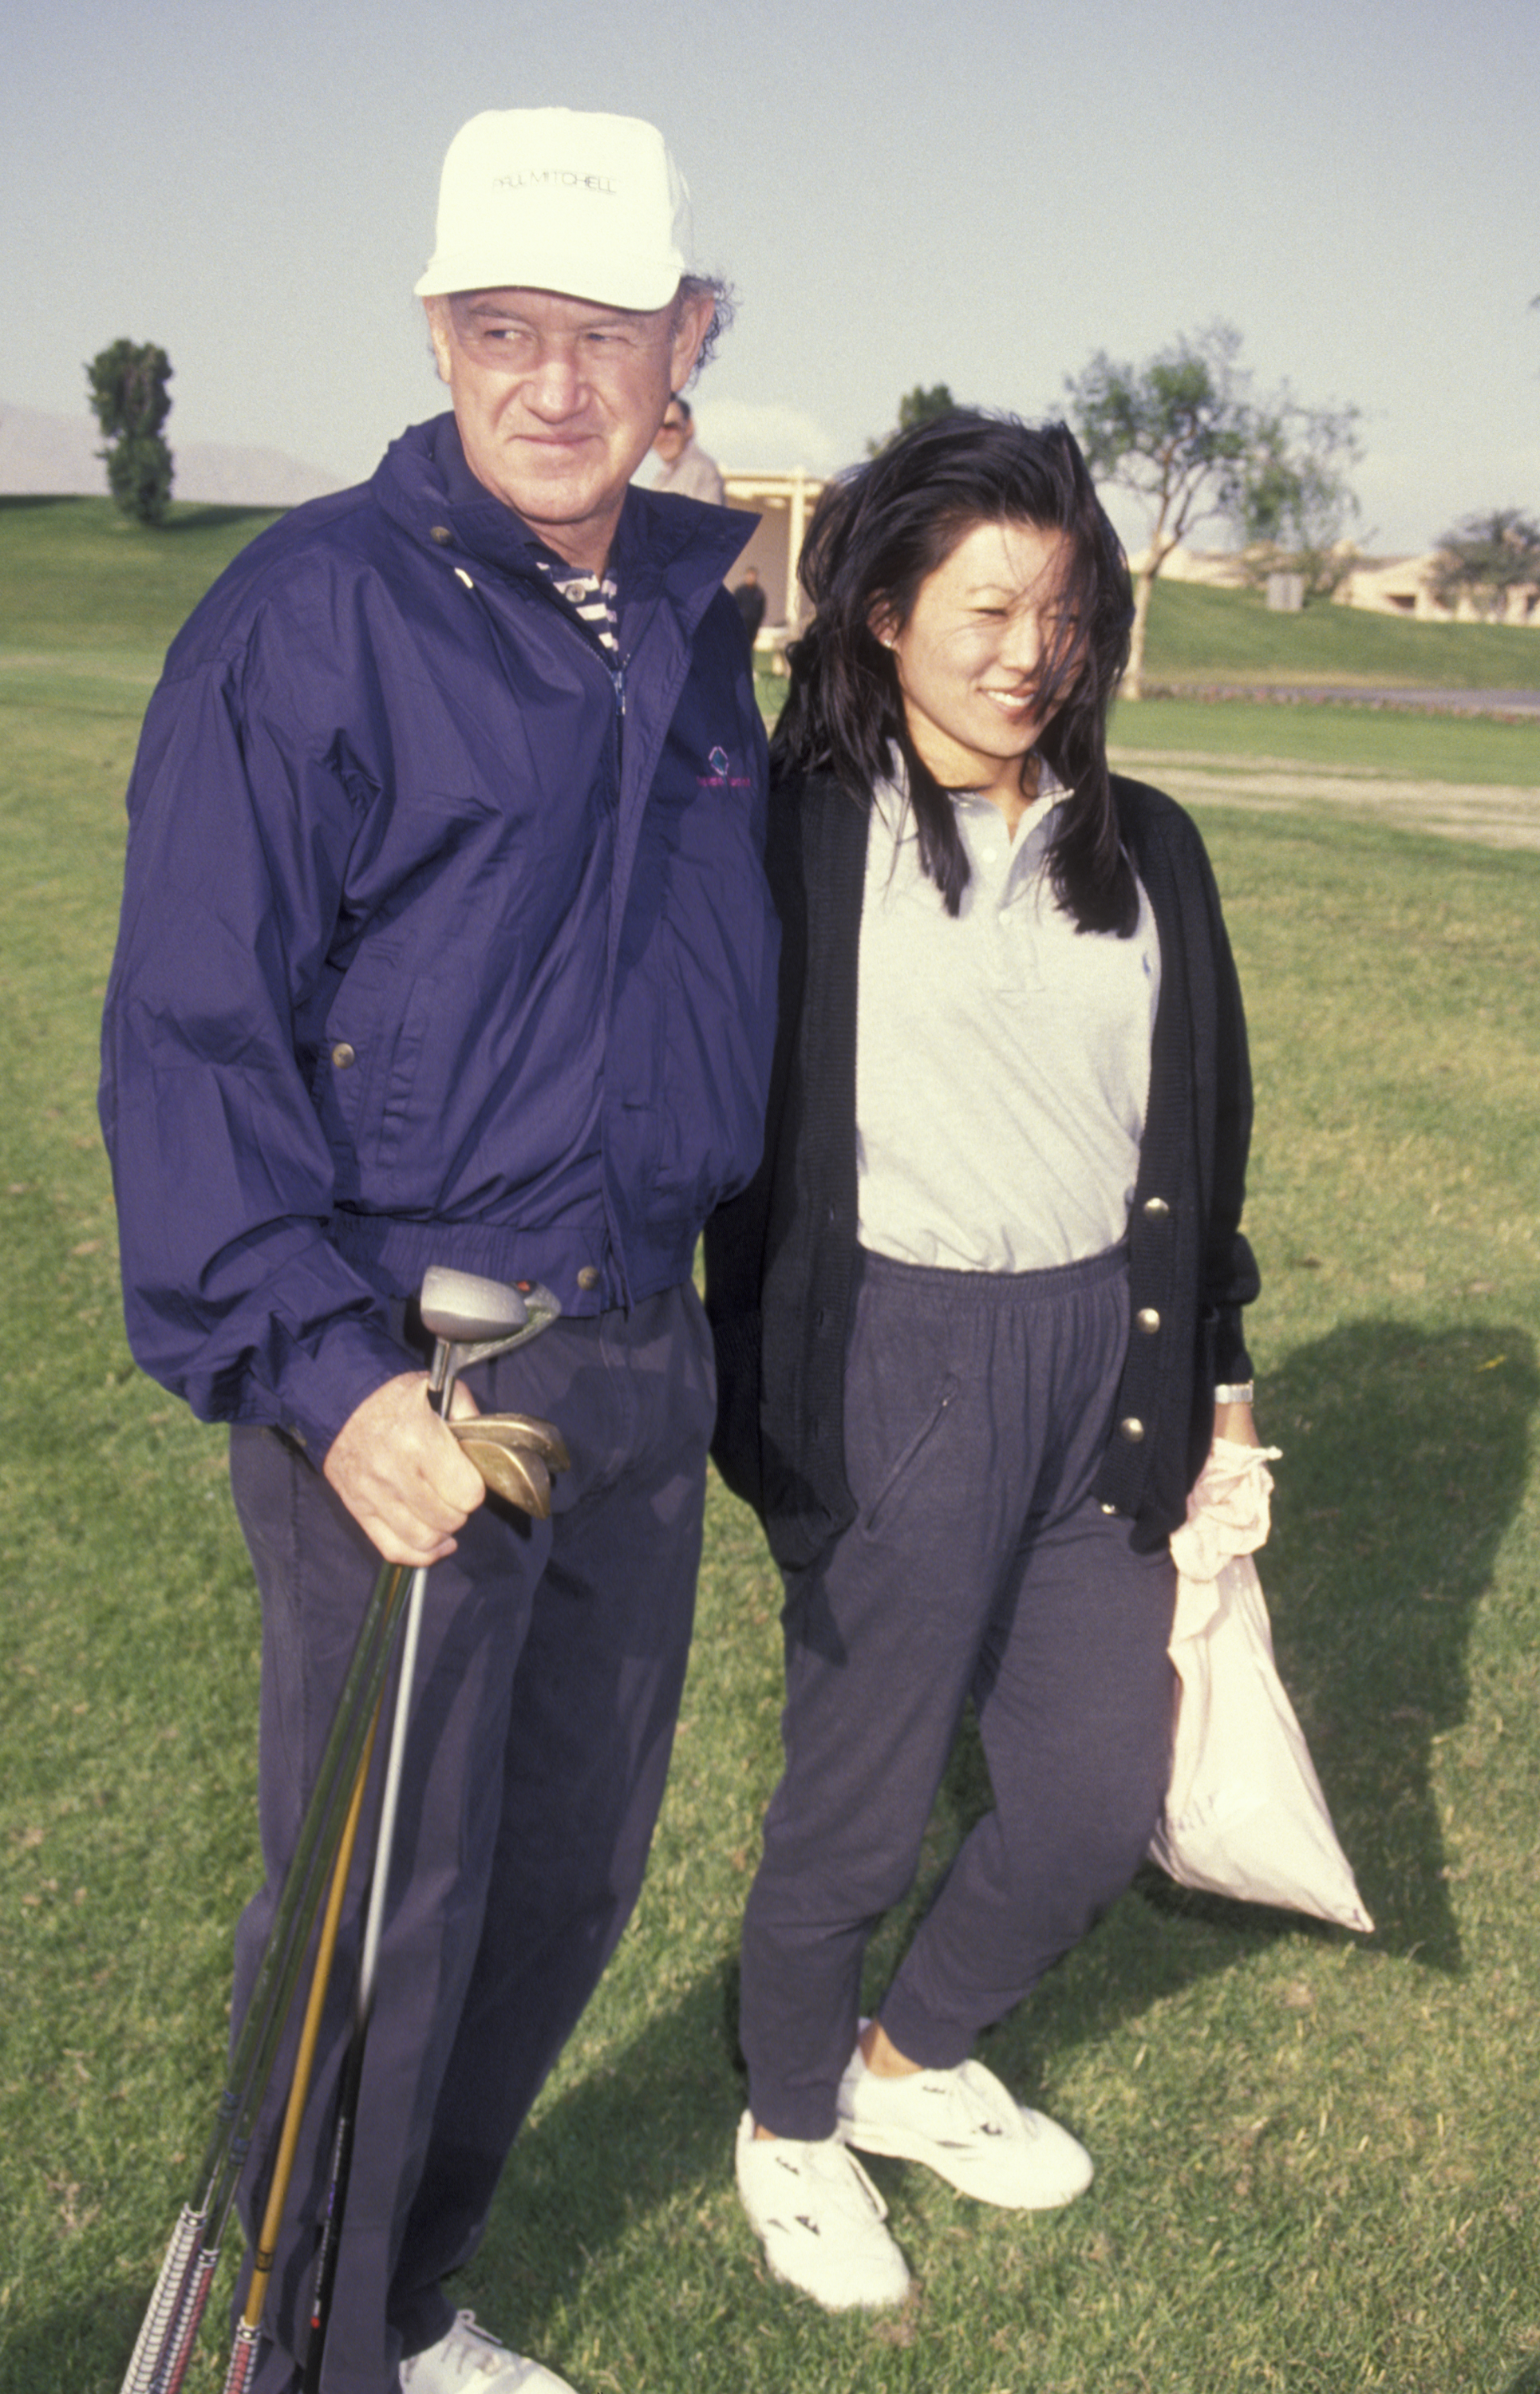 Actor Gene Hackman and wife Betsy Hackman attend the Mission Hills Pro-Celebrity Sports Invitational on November 30, 1991, at Rancho Mirage in Los Angeles, California. | Source: Getty Images